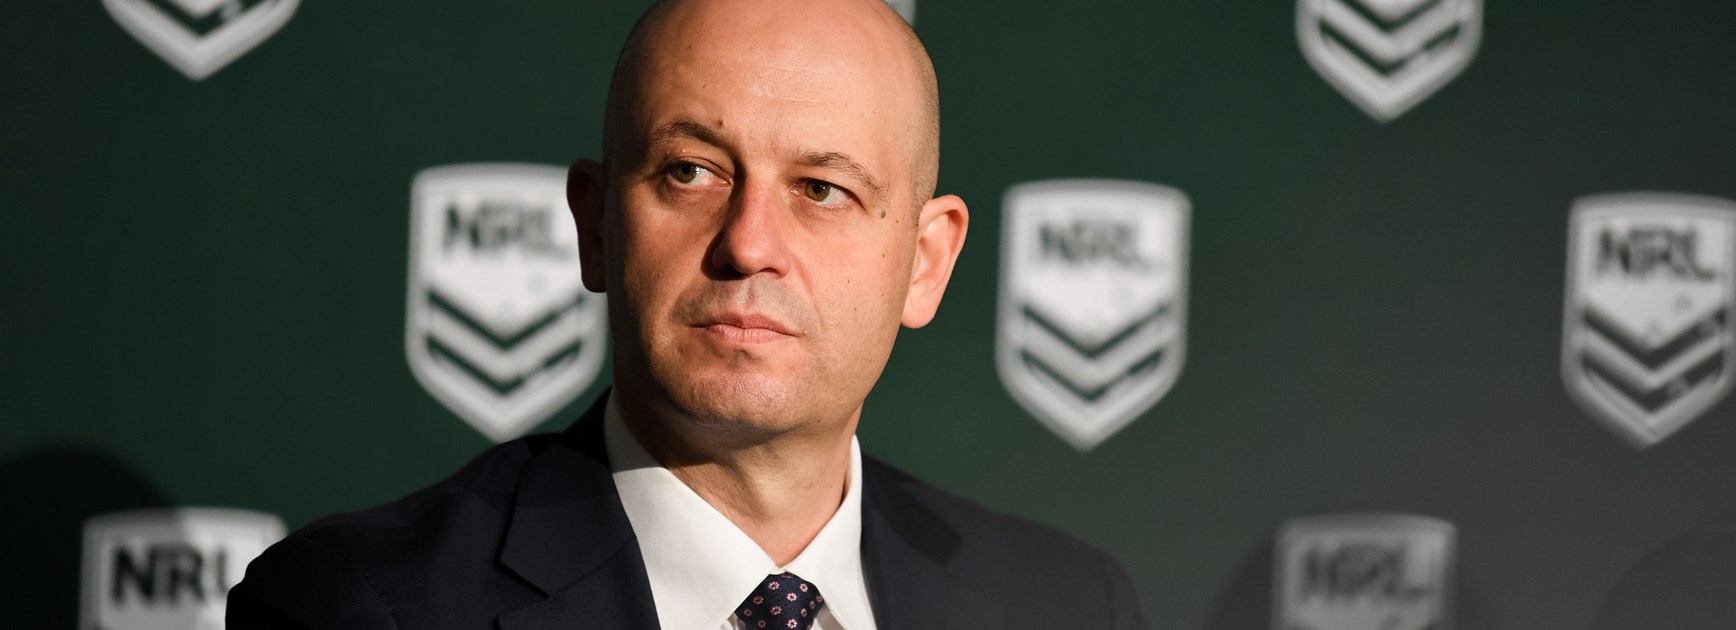 Greenberg vents frustrations at club CEOs and captains over off-field incidents